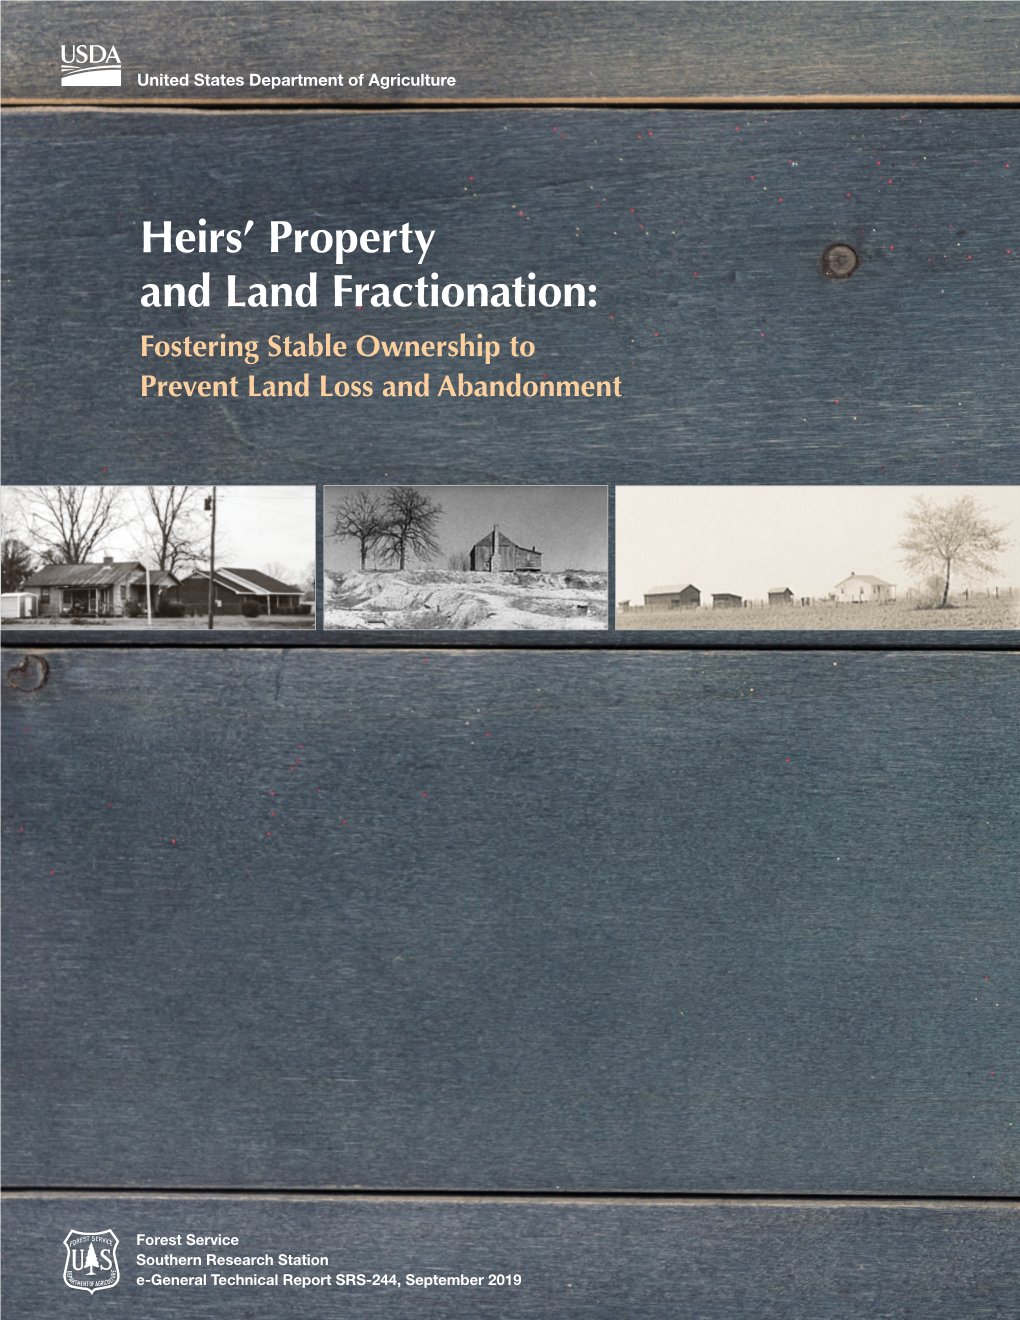 Heirs' Property and Land Fractionation: Fostering Stable Ownership To